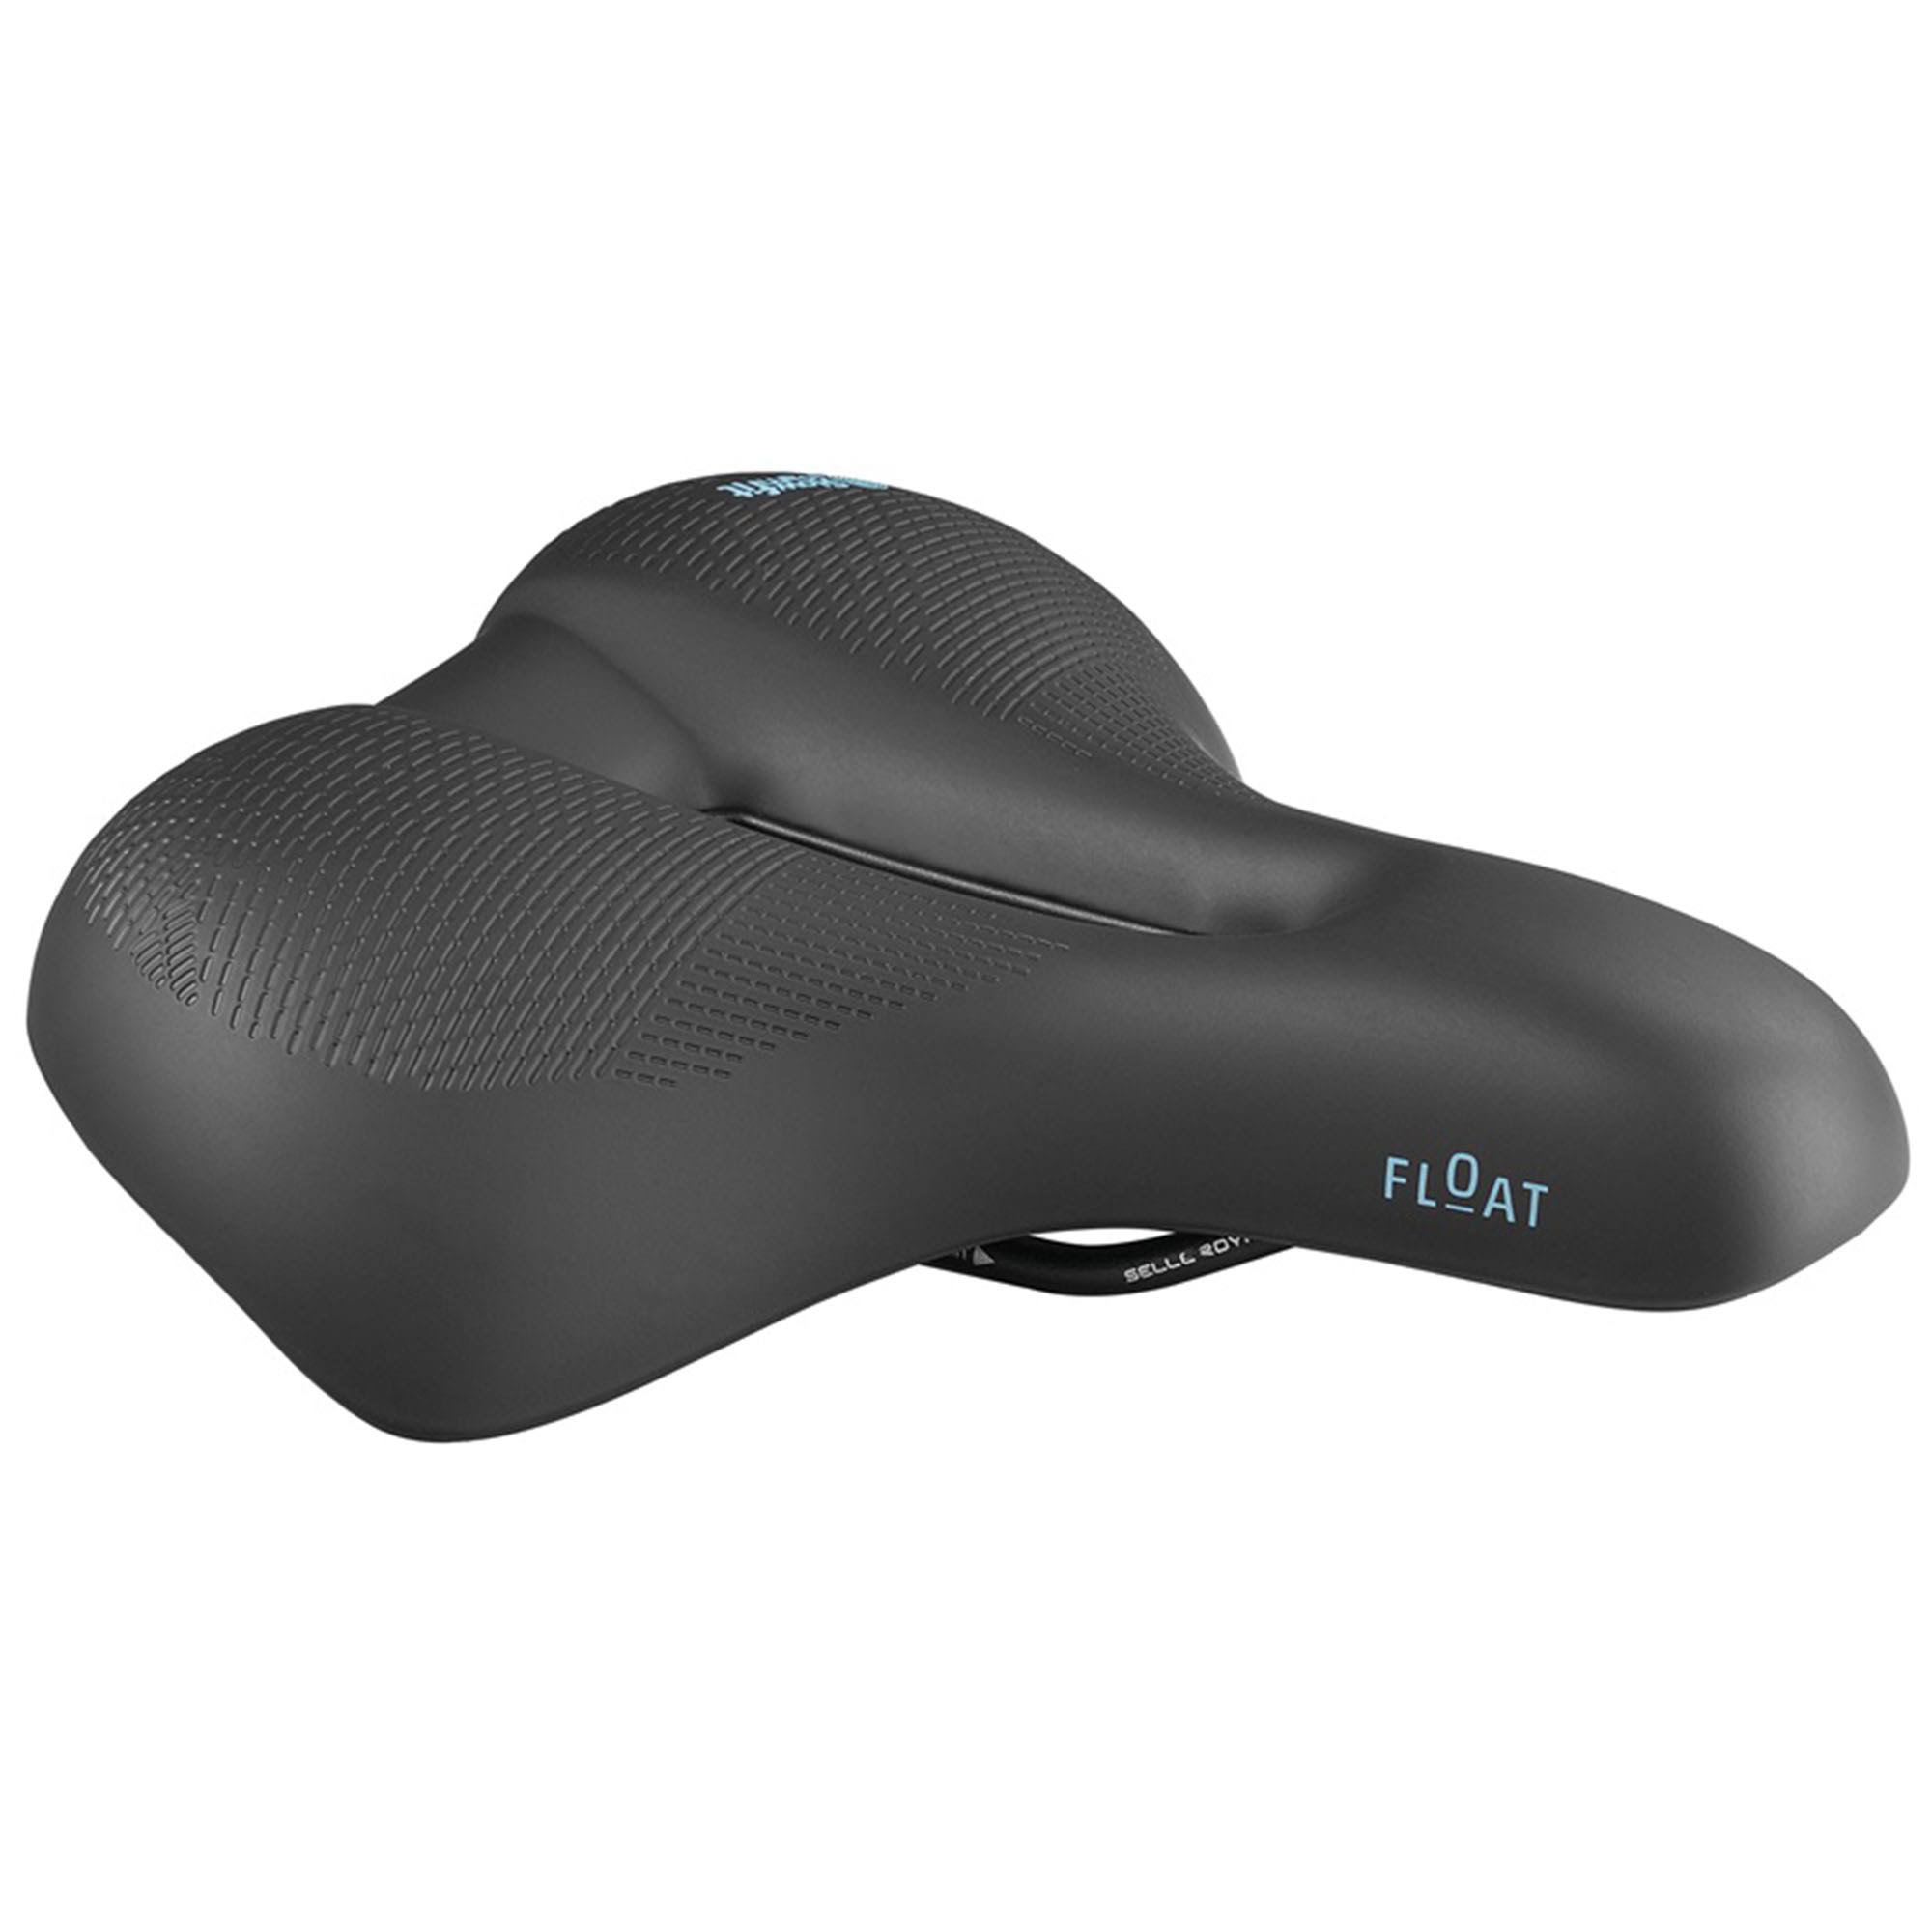 Selle Royal Float Saddle - Steel Black Relaxed